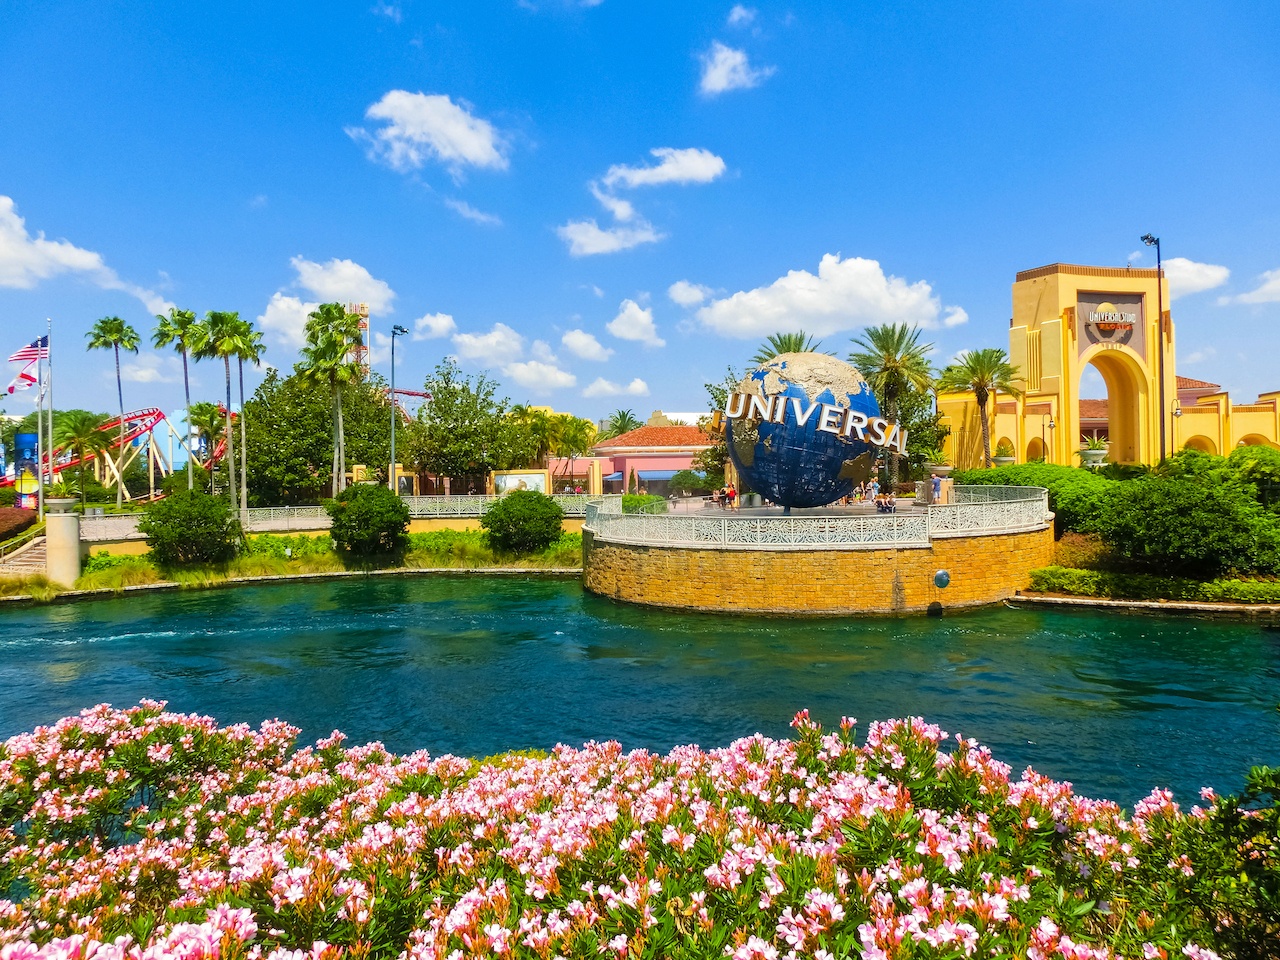 A picture of the universal globe surrounded by water and pink flowers and bushes and palm trees. In the back you can see the entrance to the park